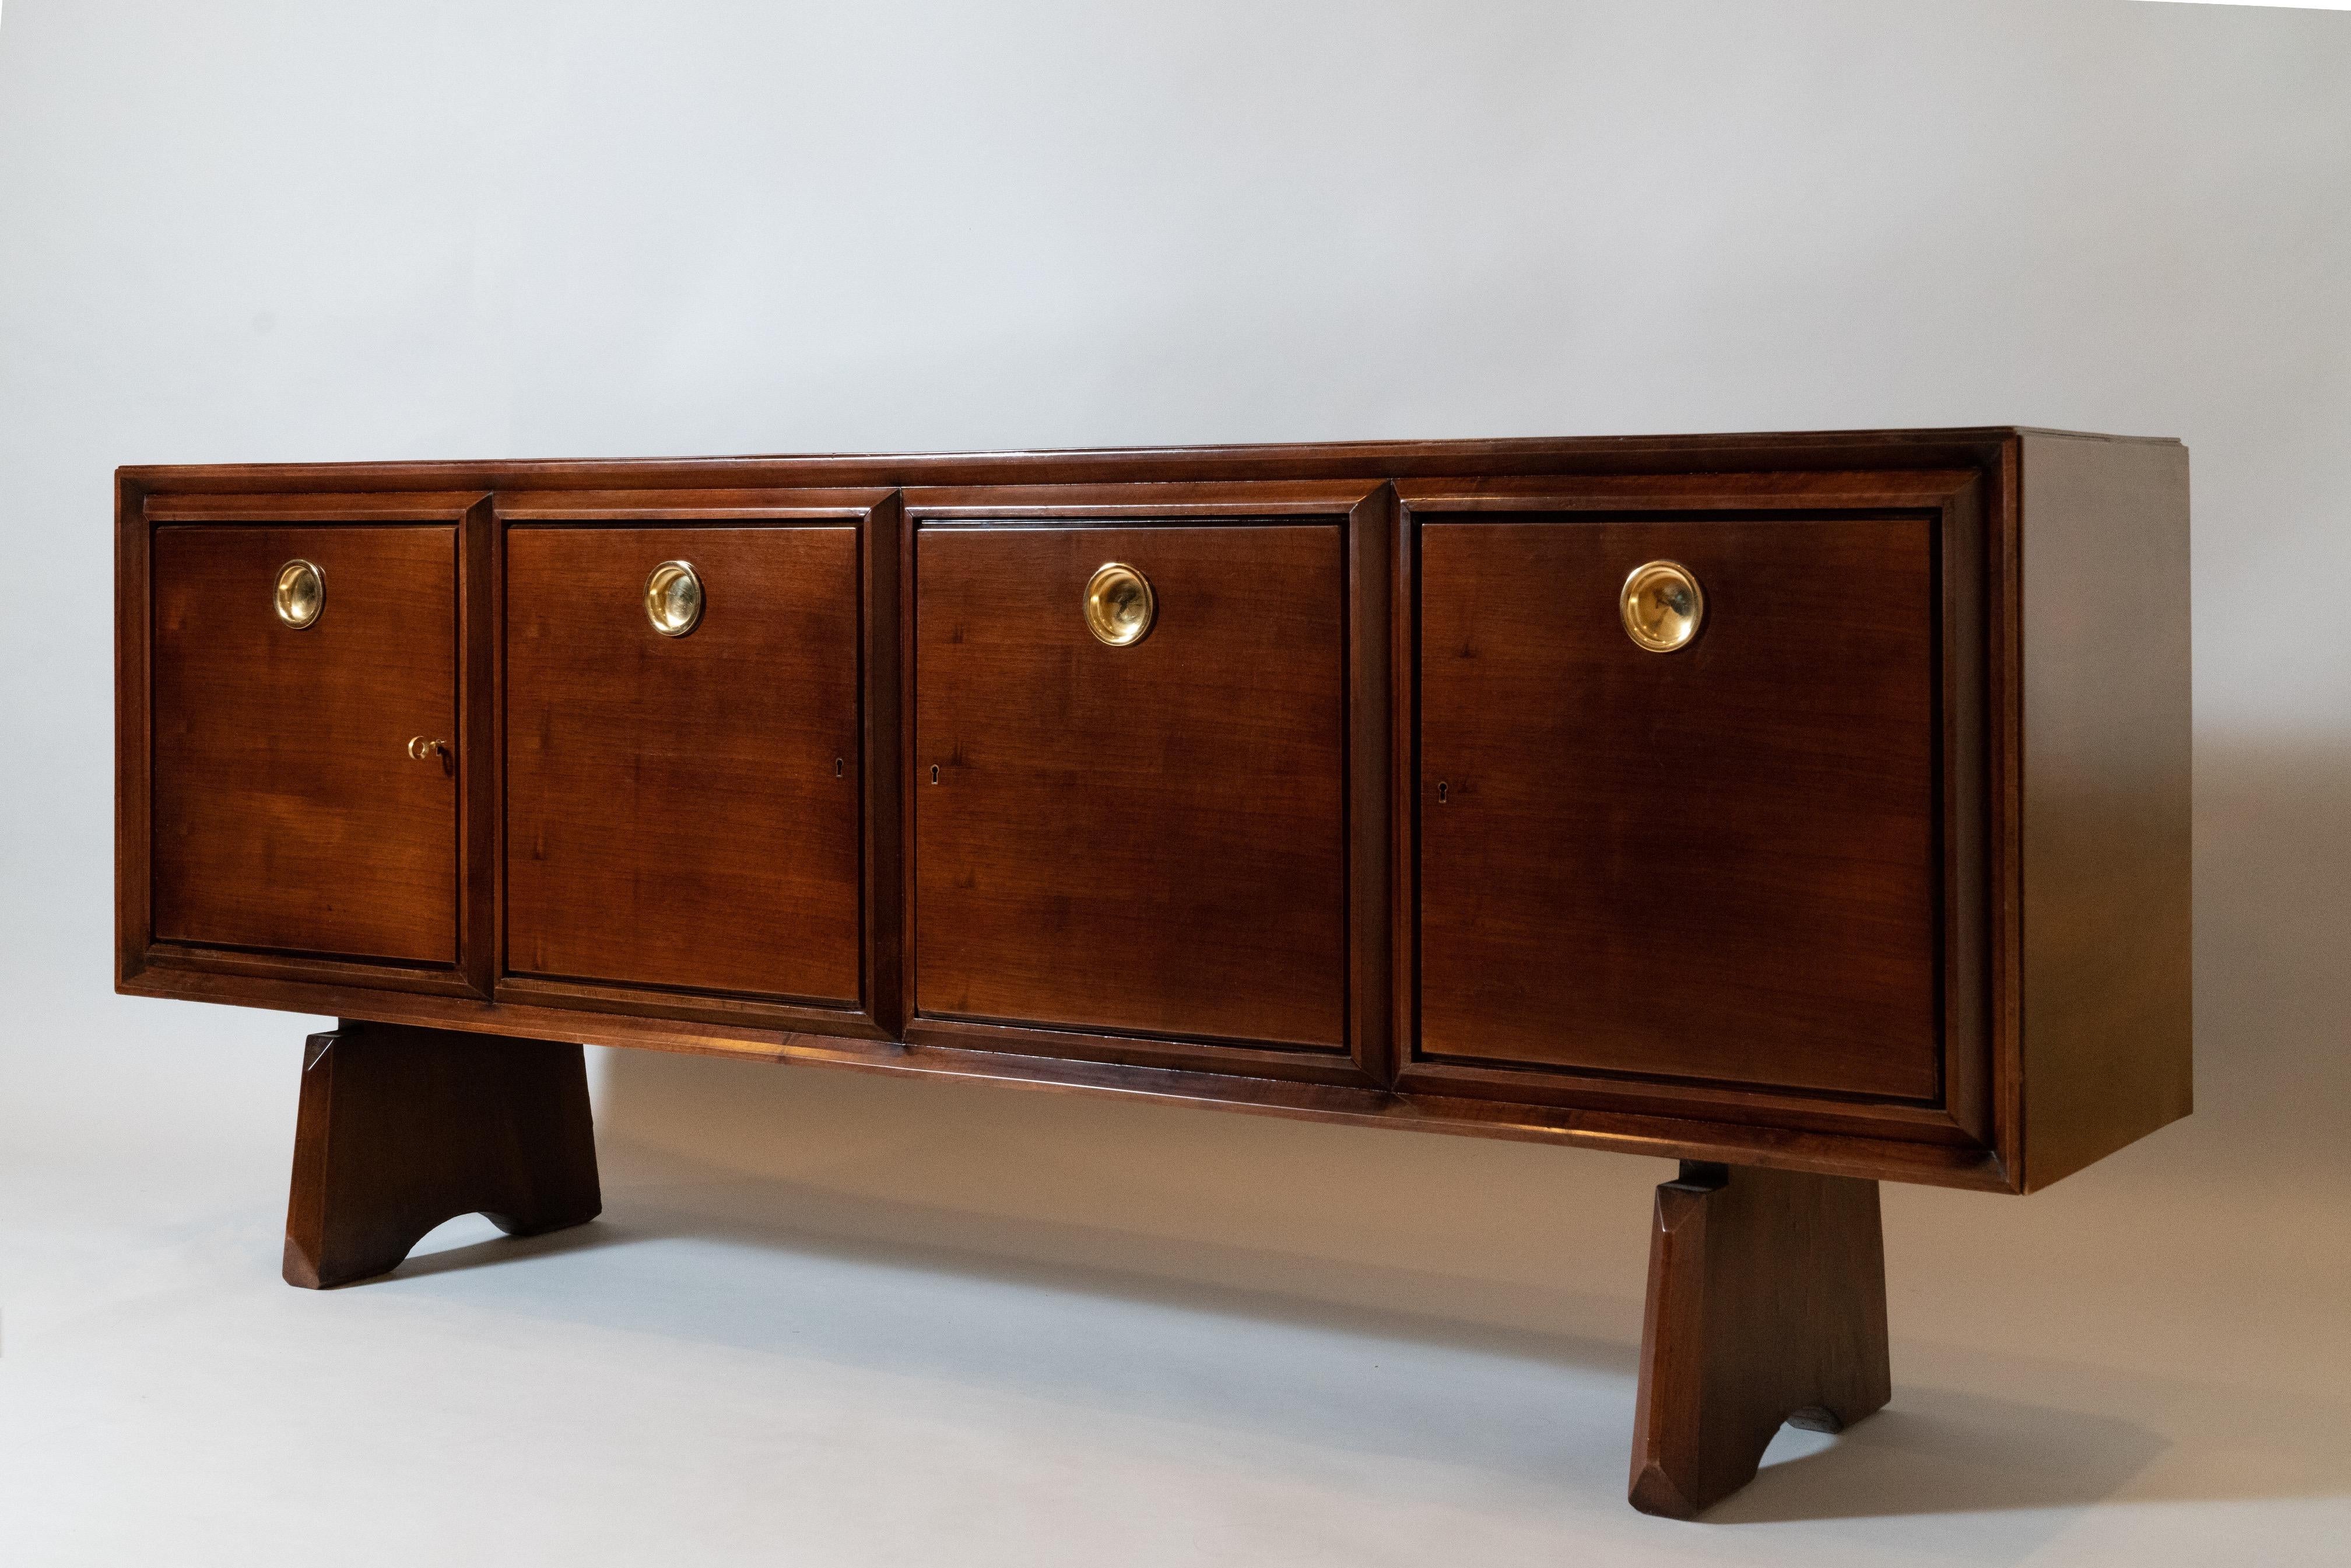 Italian Paolo Buffa: Imposing Four-Door Cabinet in Walnut and Polished Brass, Italy 1950 For Sale